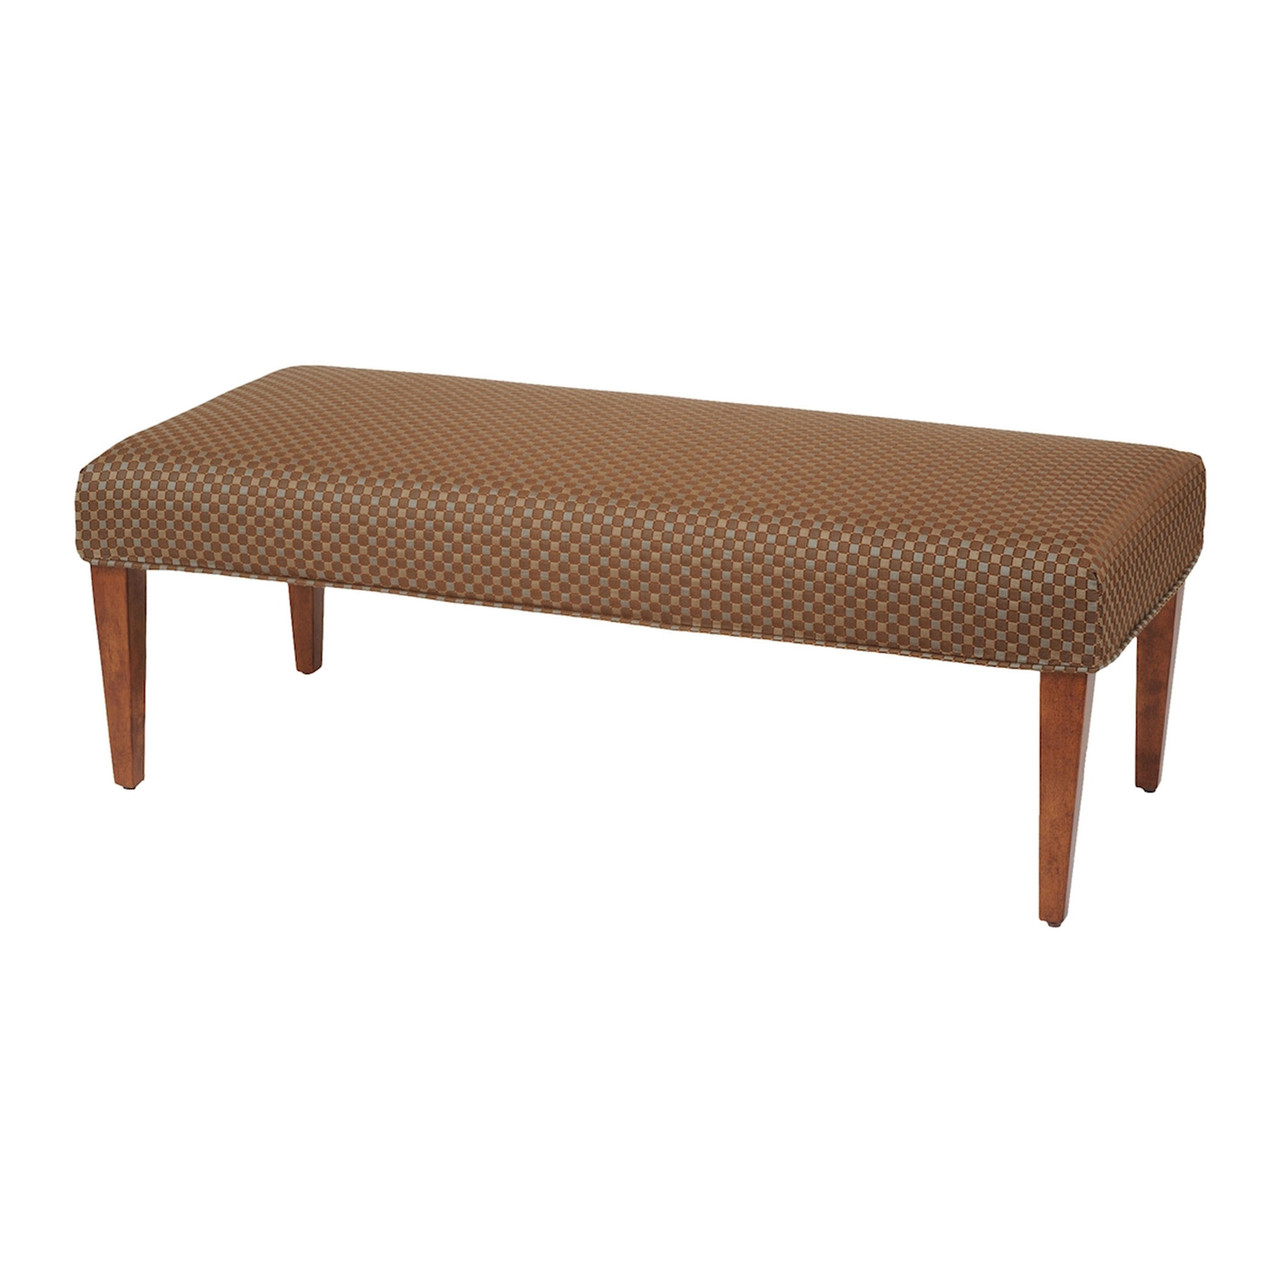 ELK HOME 6081312 Belvedere/Ciroc Bench - COVER ONLY